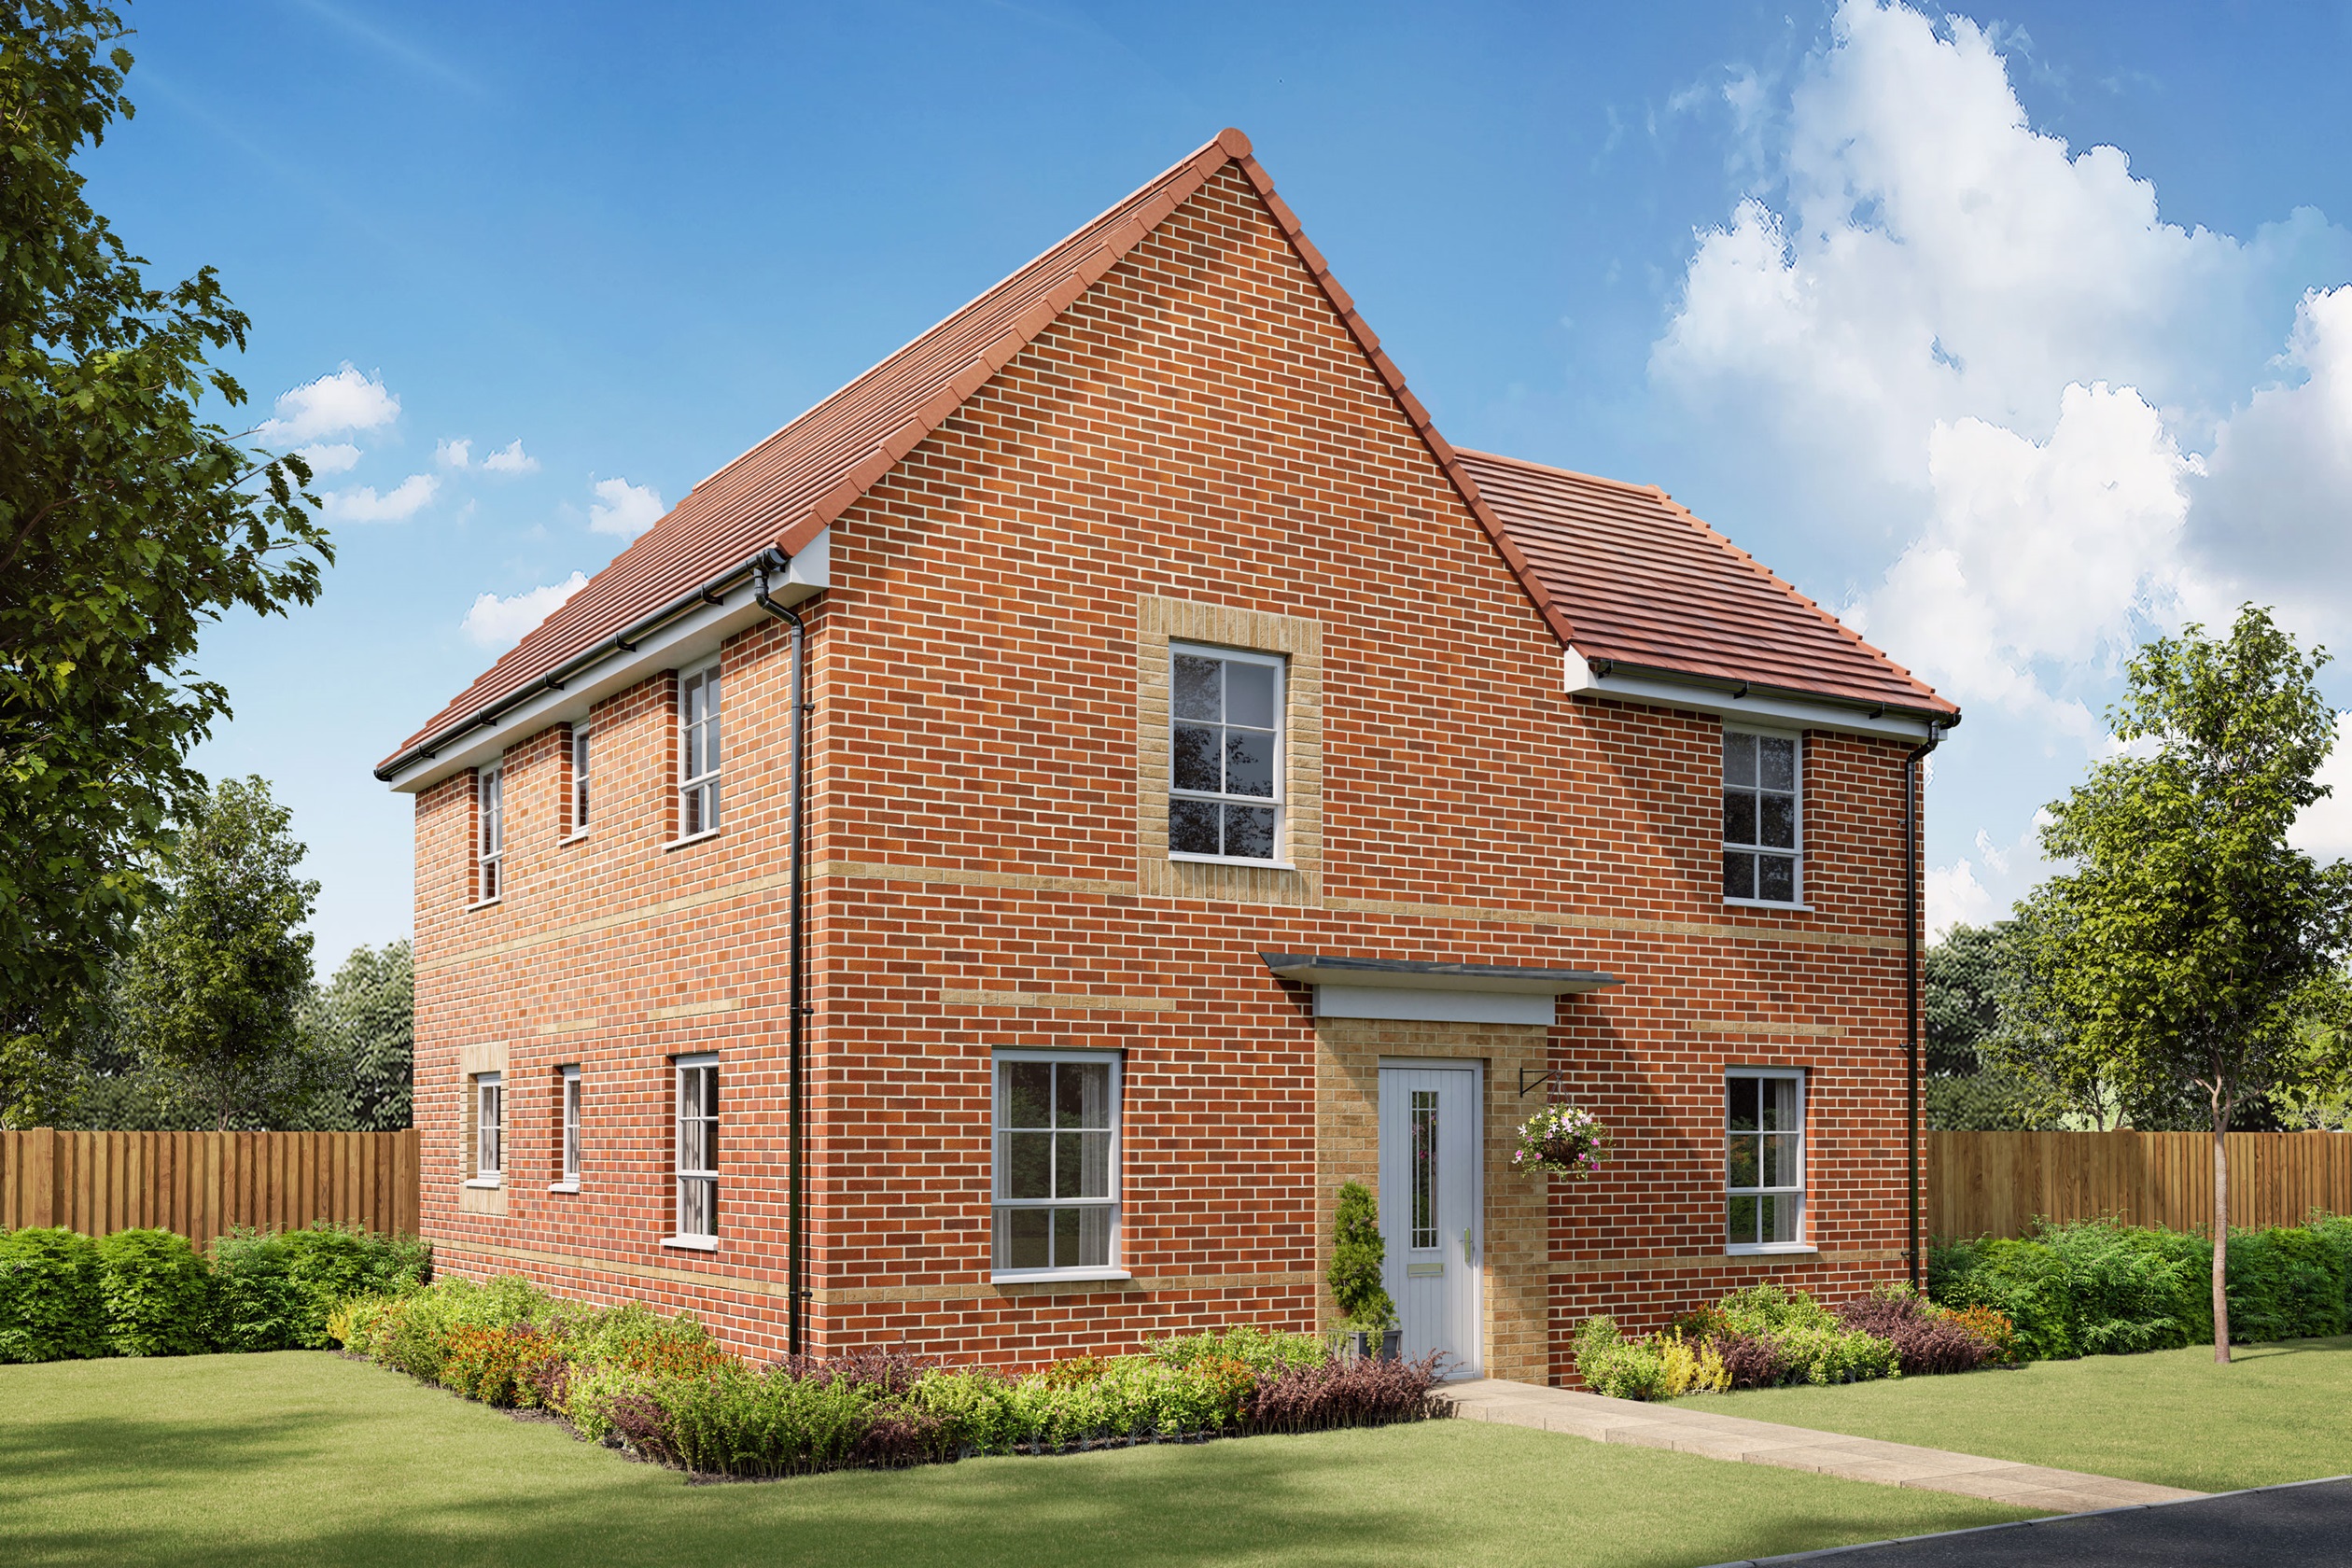 Property 1 of 10. Exterior CGI View Of Our 4 Bed Alderney Home